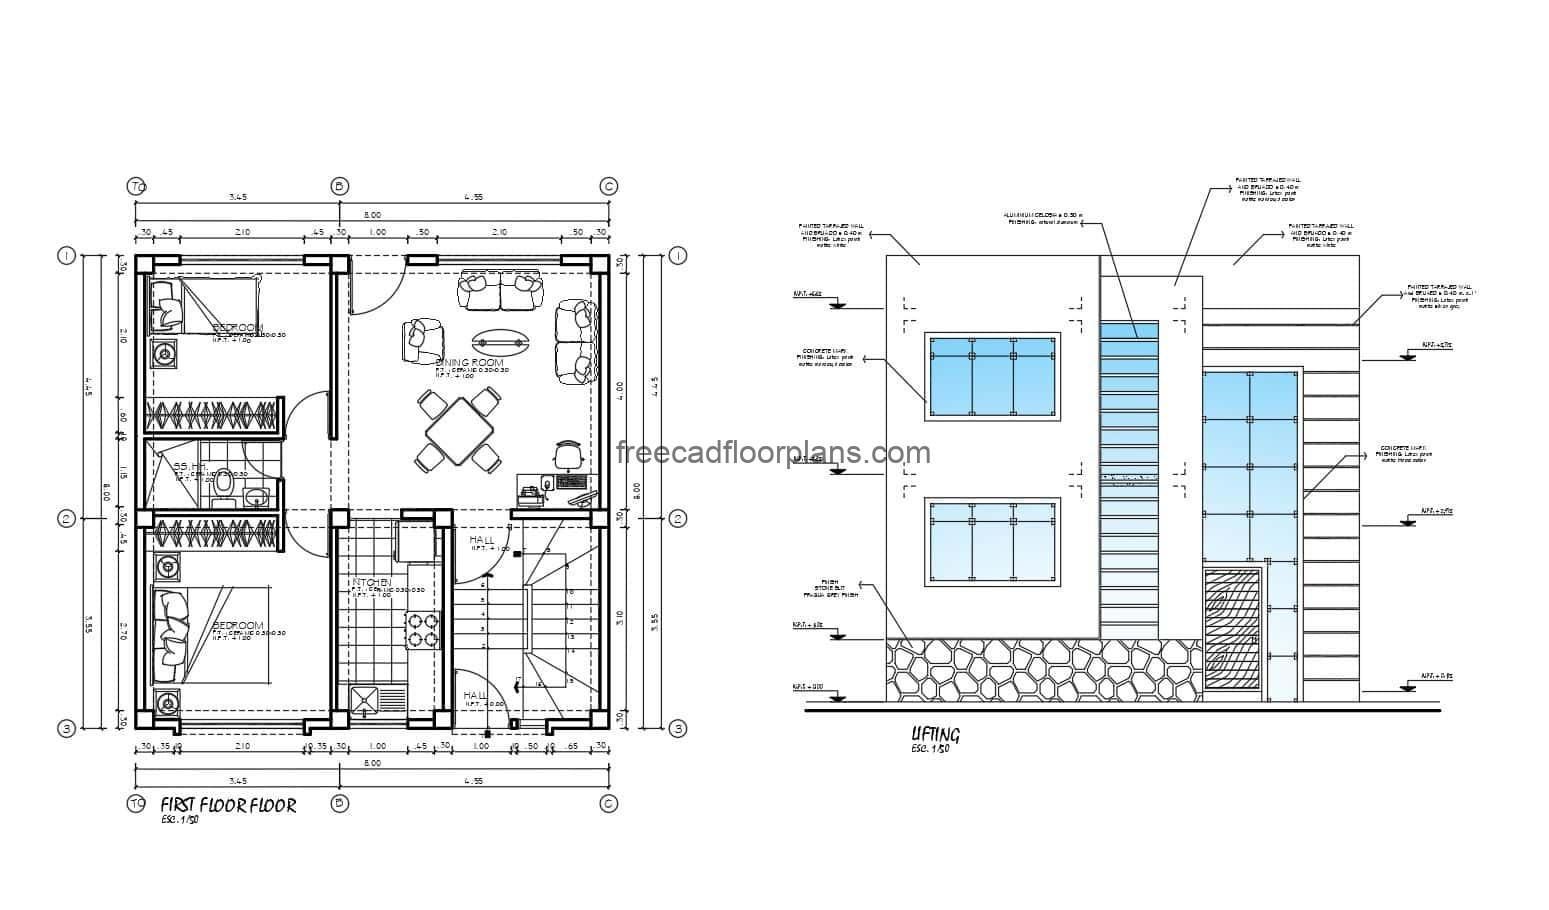 Architectural plan of individual small house on two levels with modern style facade, the basic and small distribution residence has two bedrooms with a shared bathroom, living room, small kitchen and stair block to the other living unit. 2D drawings in AutoCAD DWG format for free download, editable blueprints with dimensions and interior architectural plan with AutoCAD blocks.